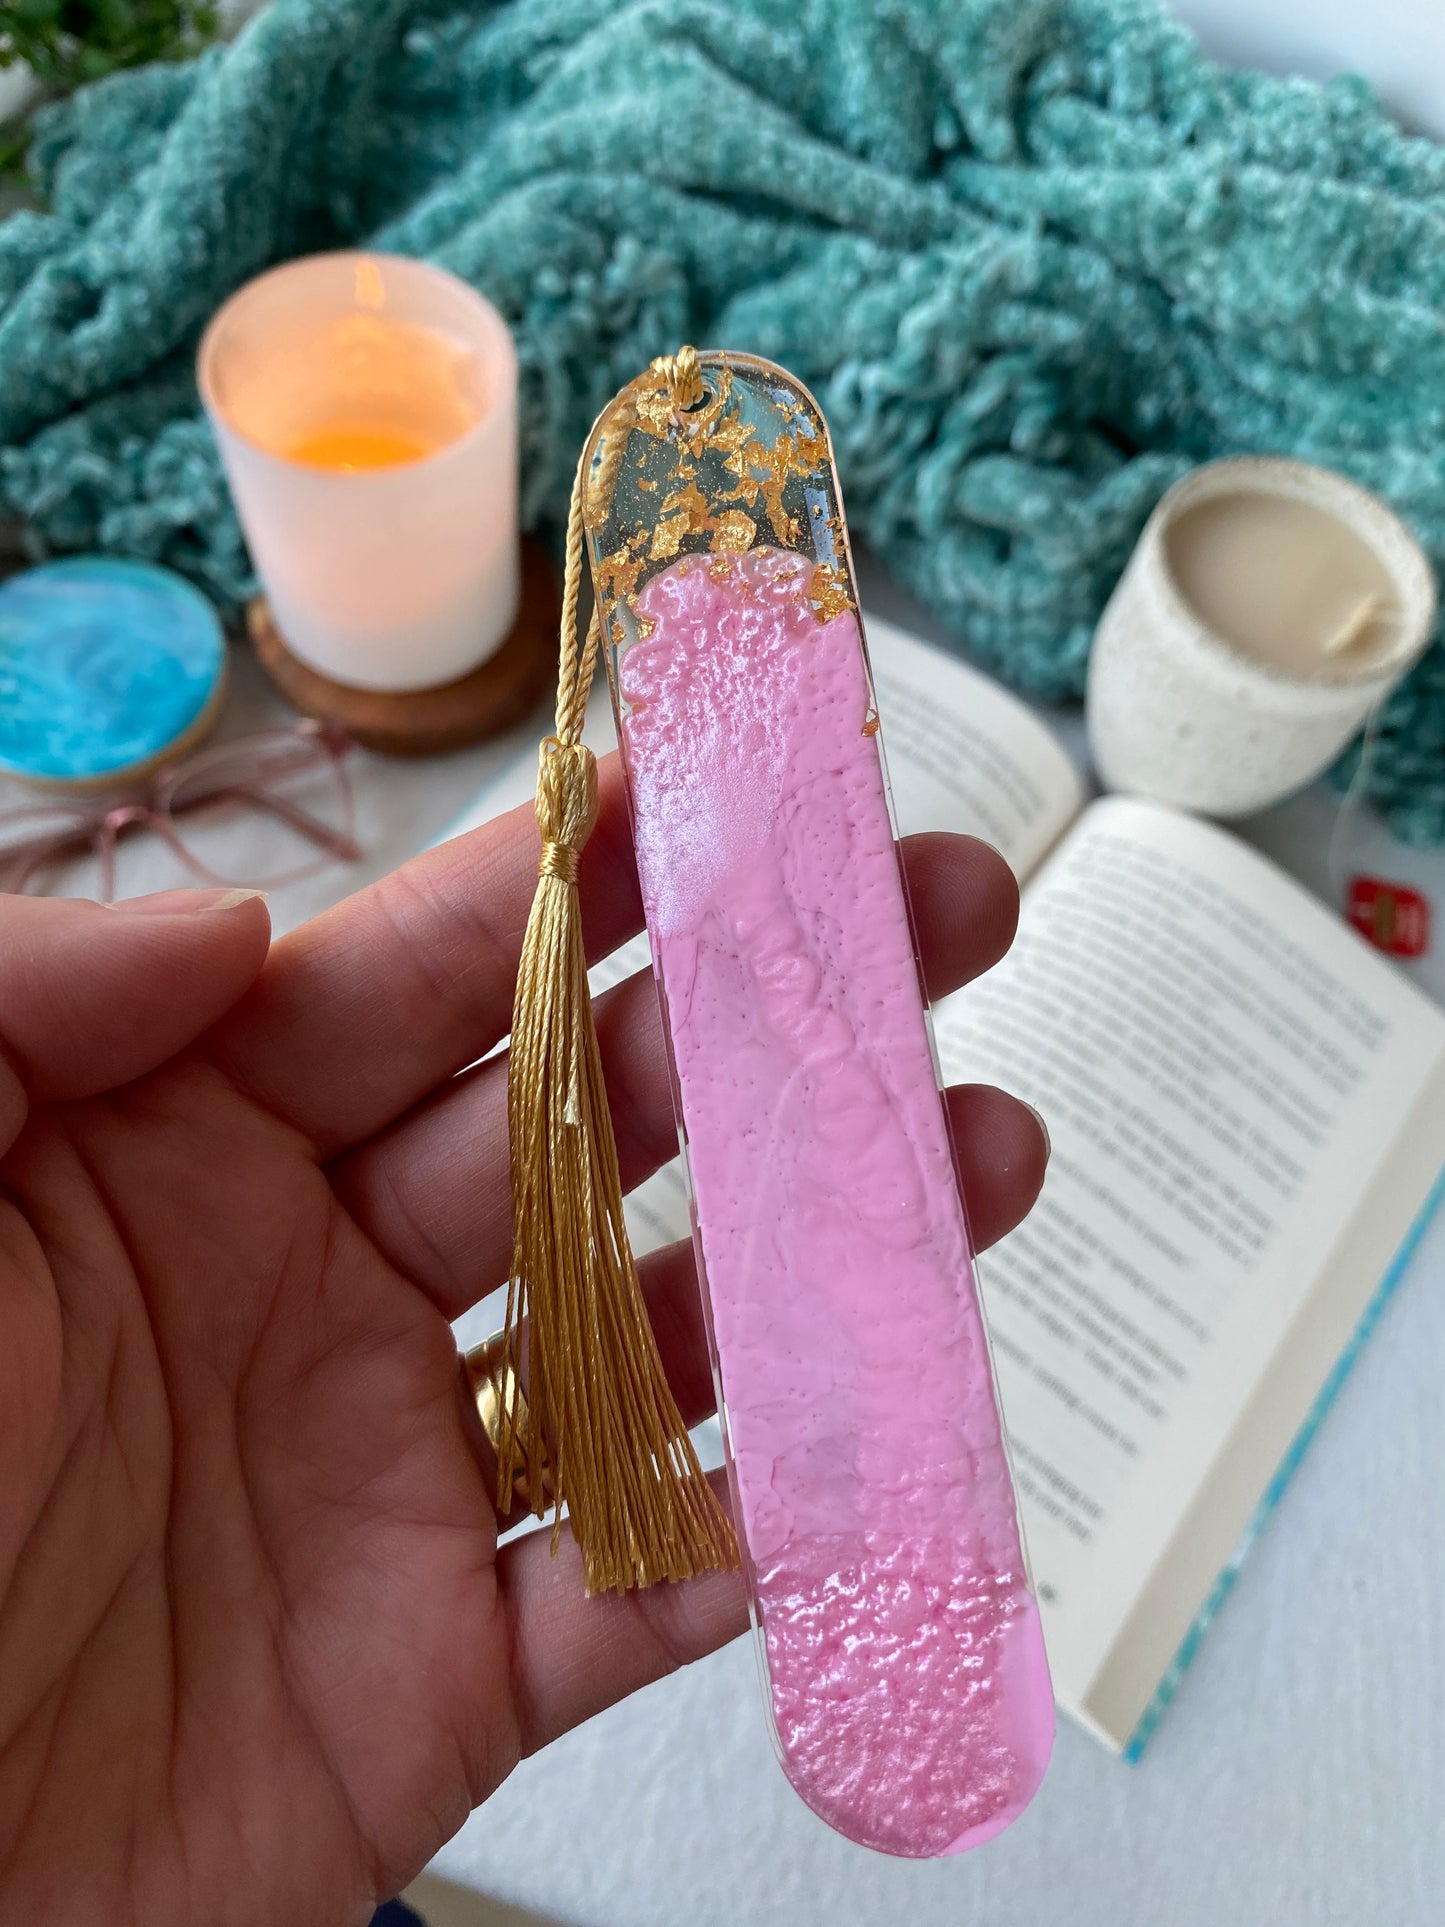 BOOKMARK - created in pink resin with gold flakes